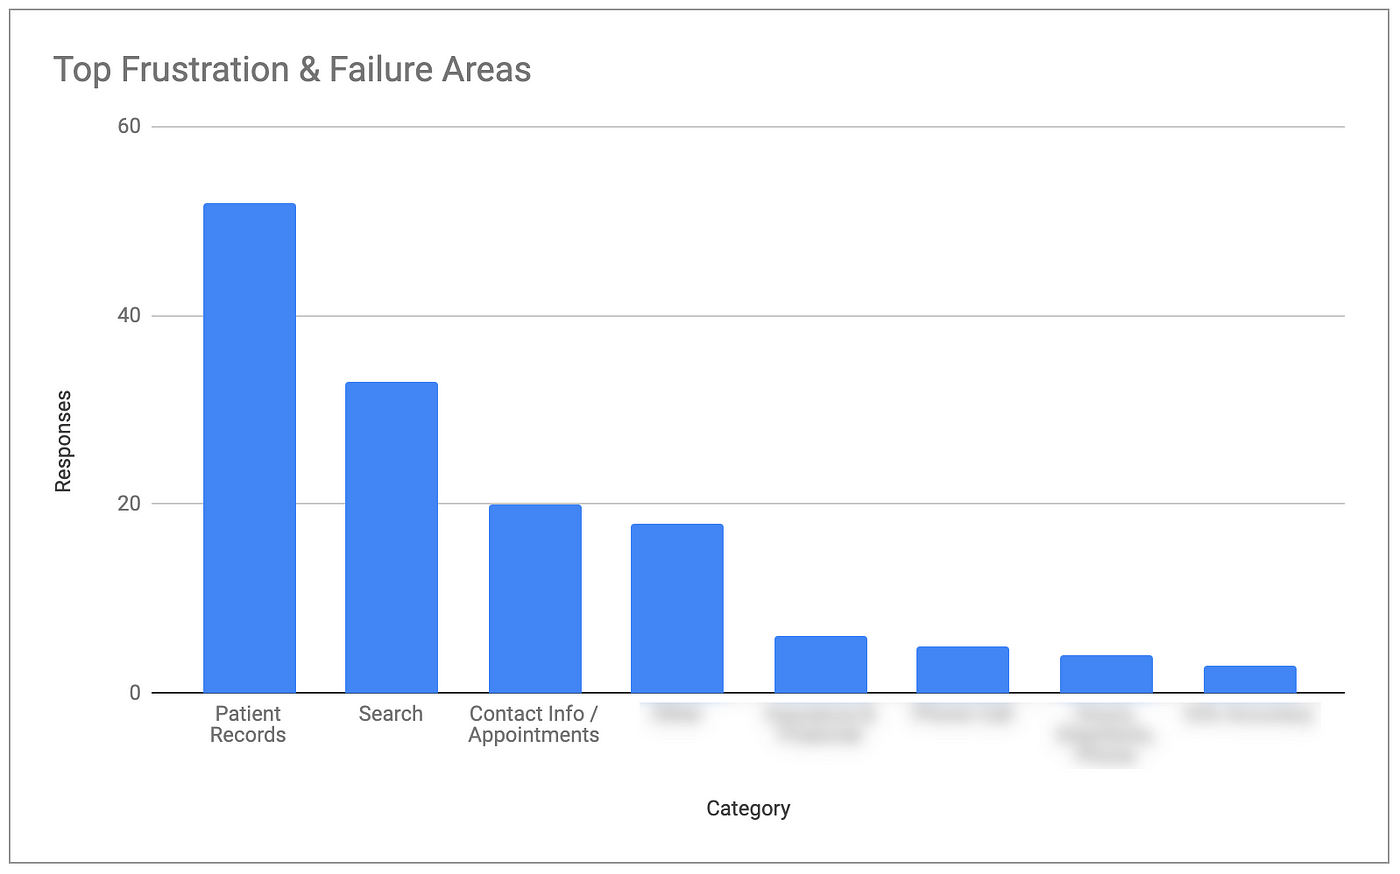 Graph showing top frustration and failure areas